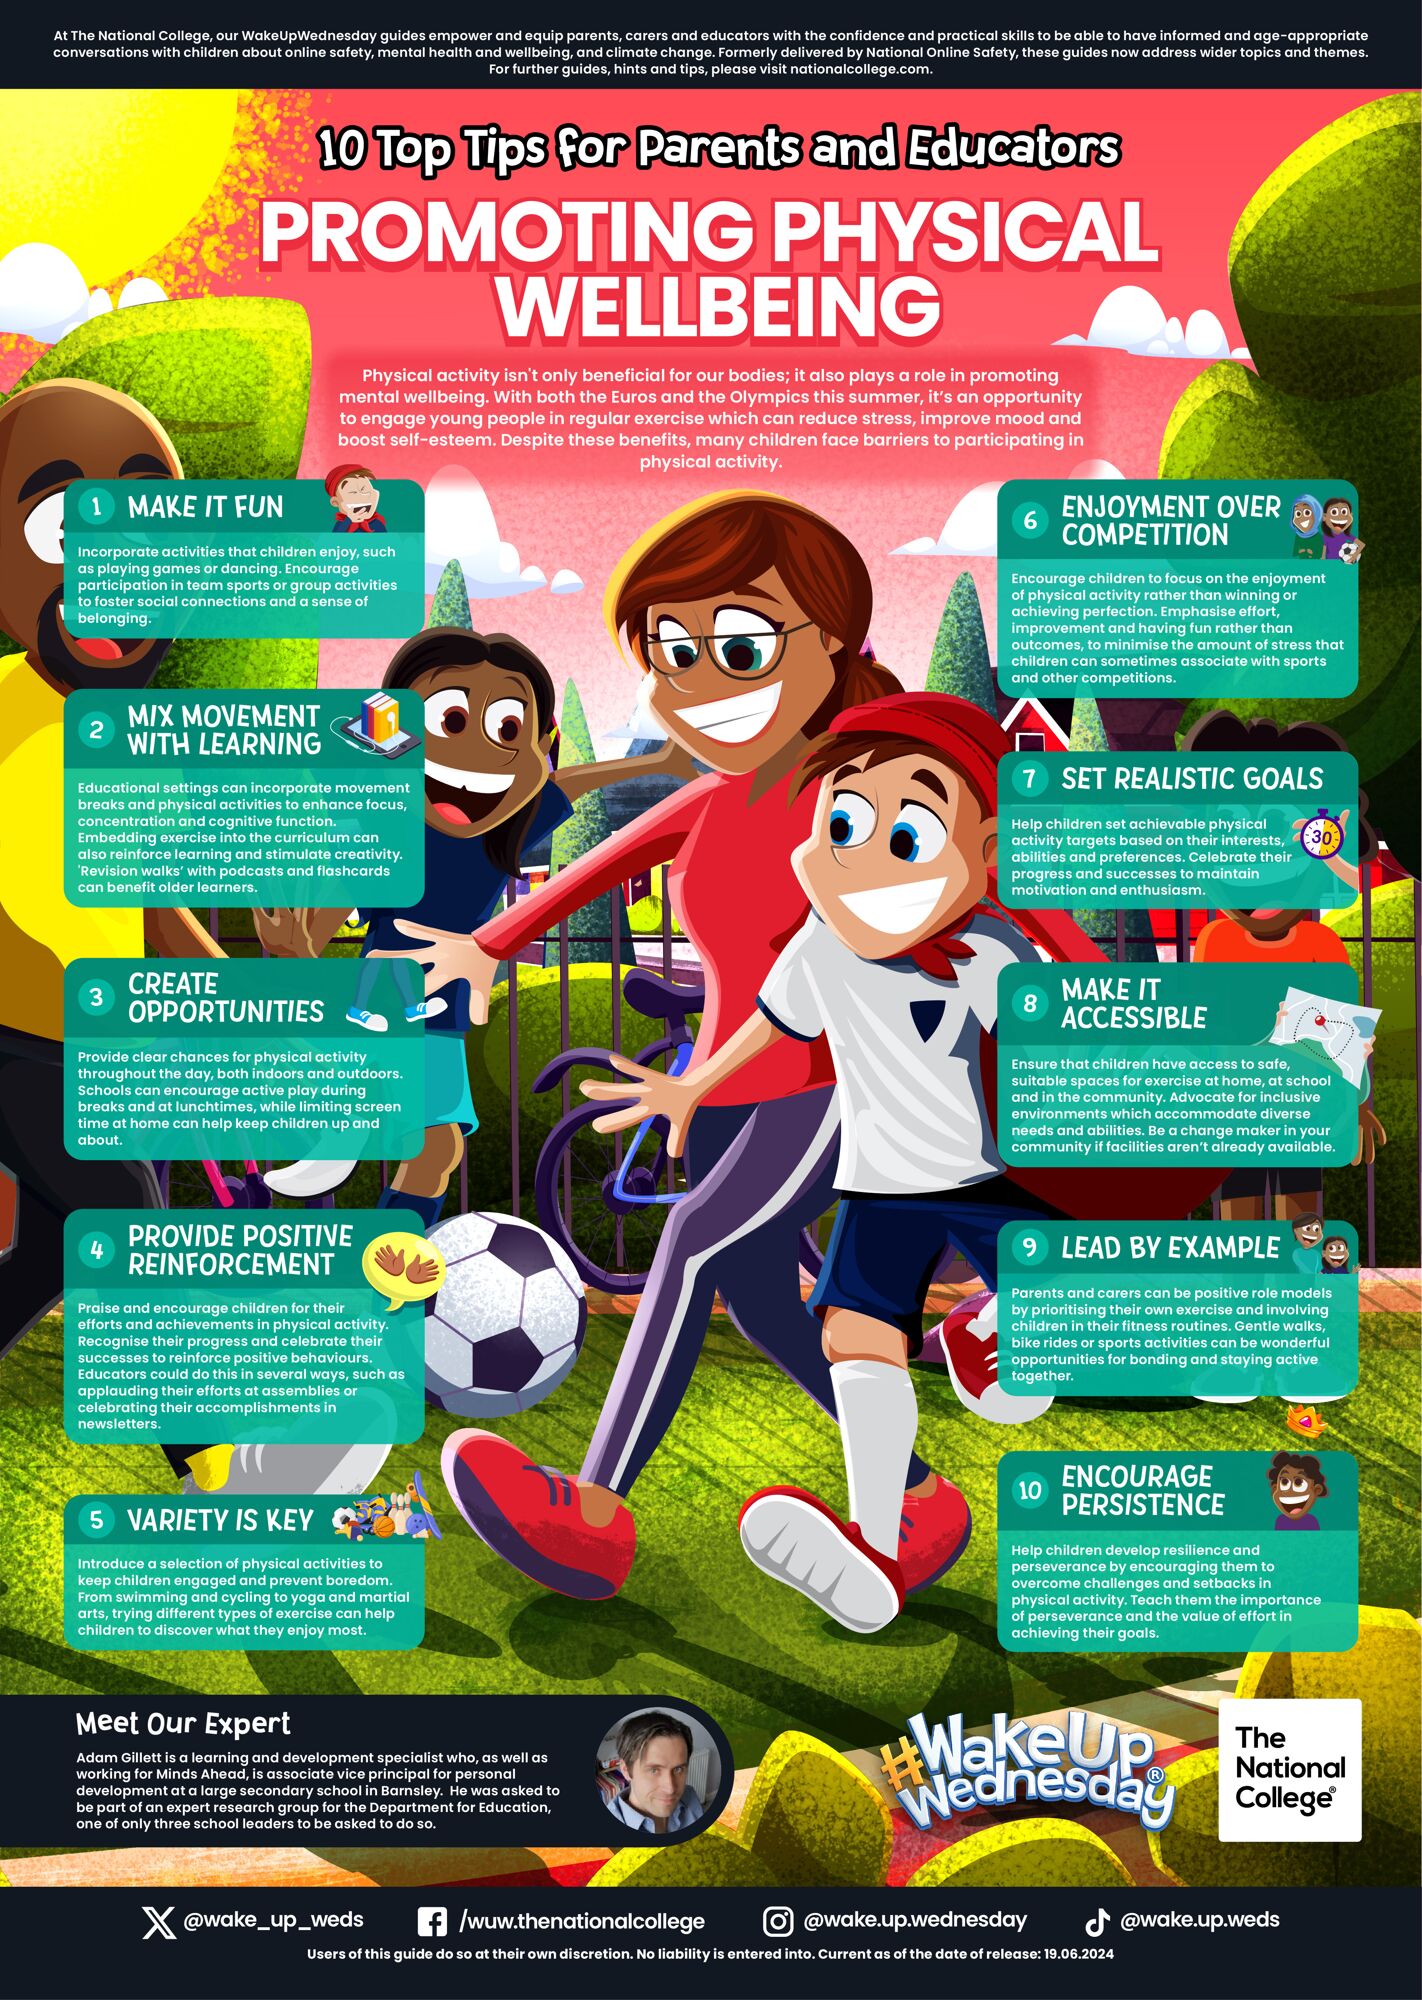 Promoting physical wellbeing